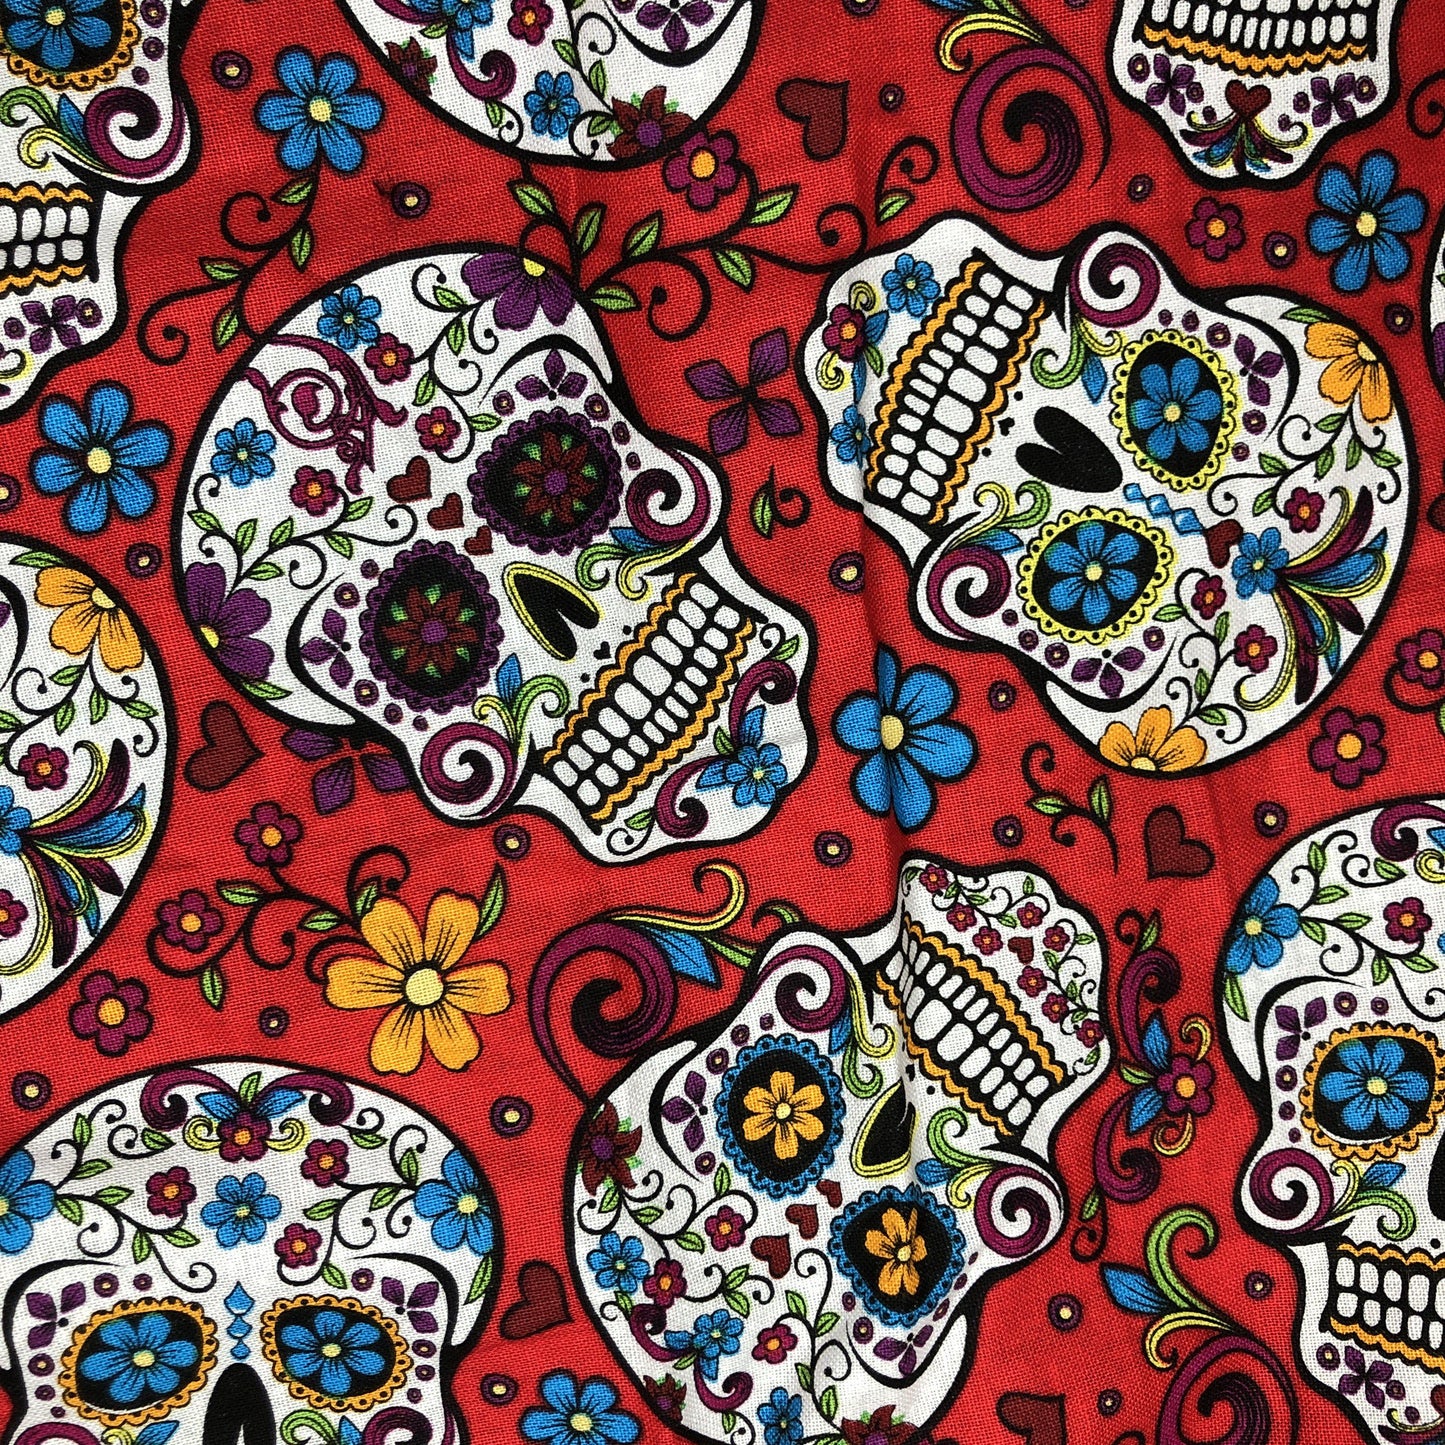 Bright colourful sugar skull pattern with a red background